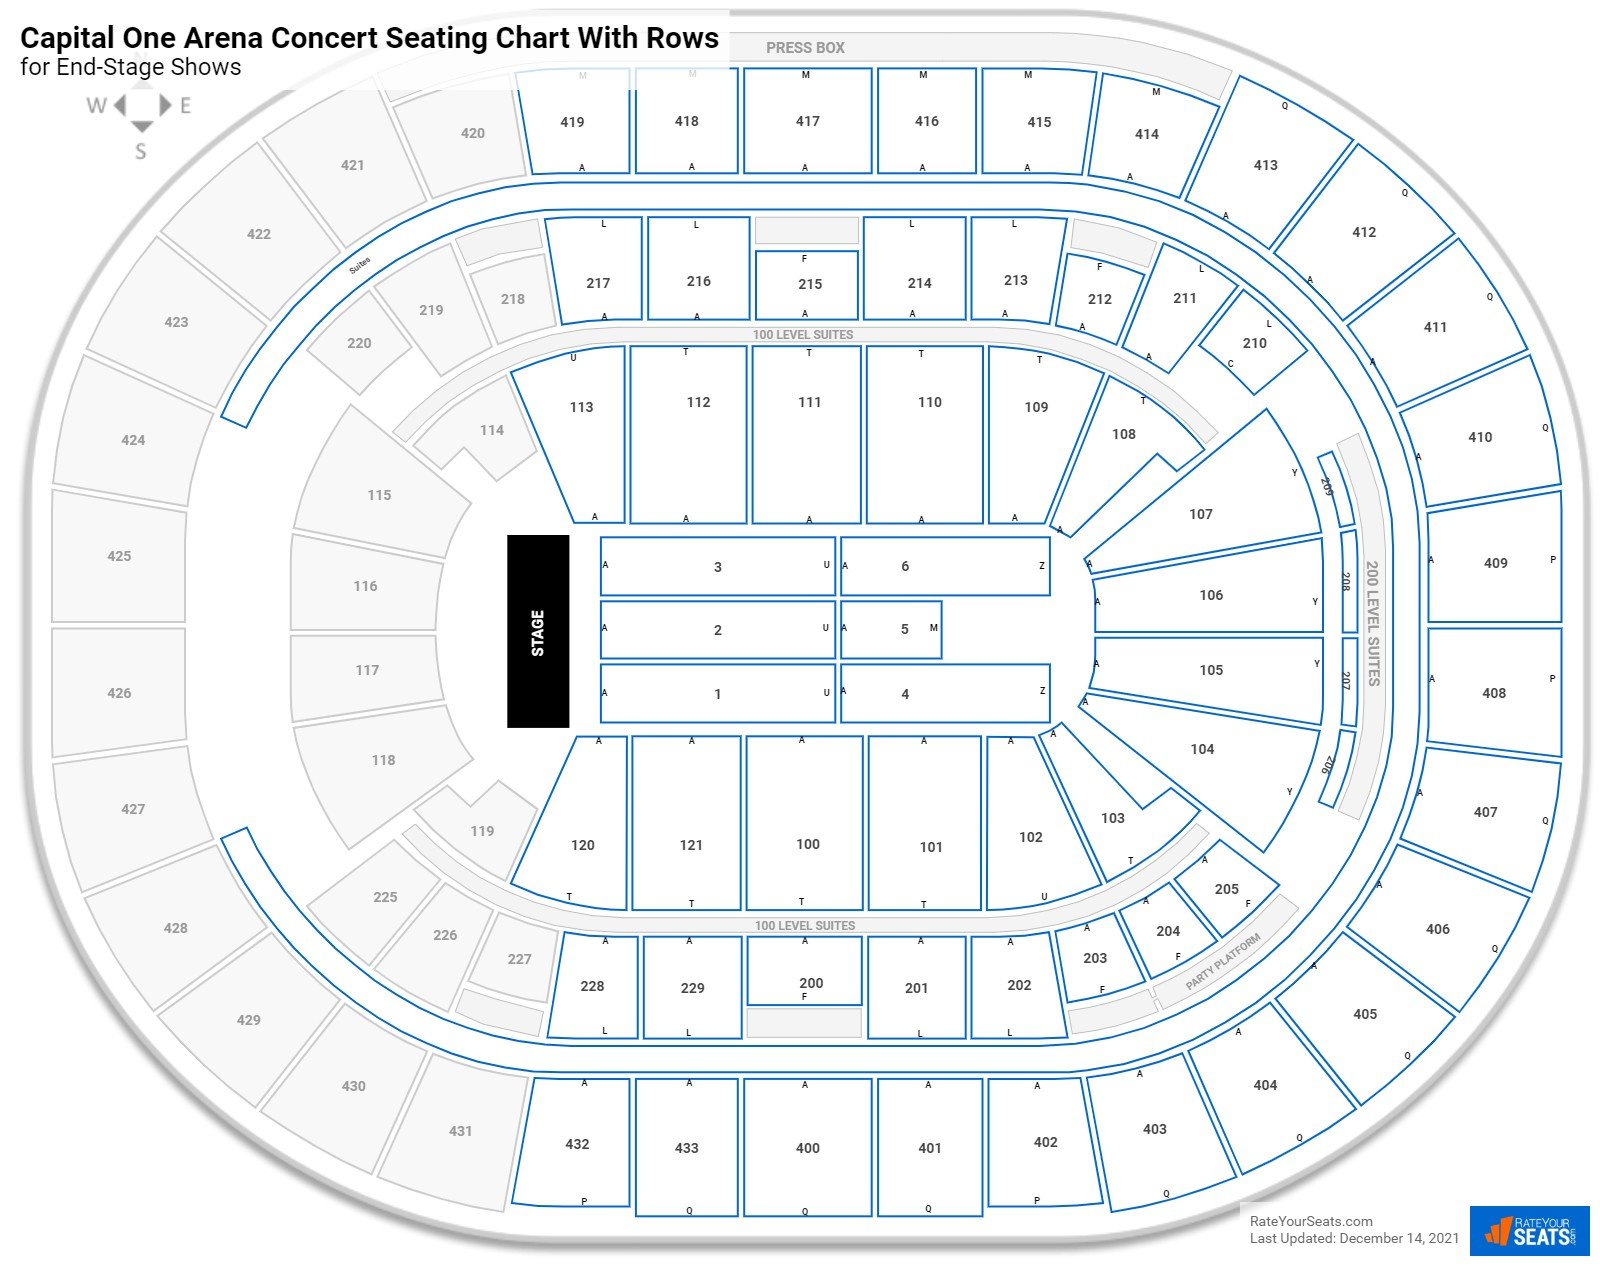 Capital One Arena Seating Charts For Concerts Rateyourseats Com